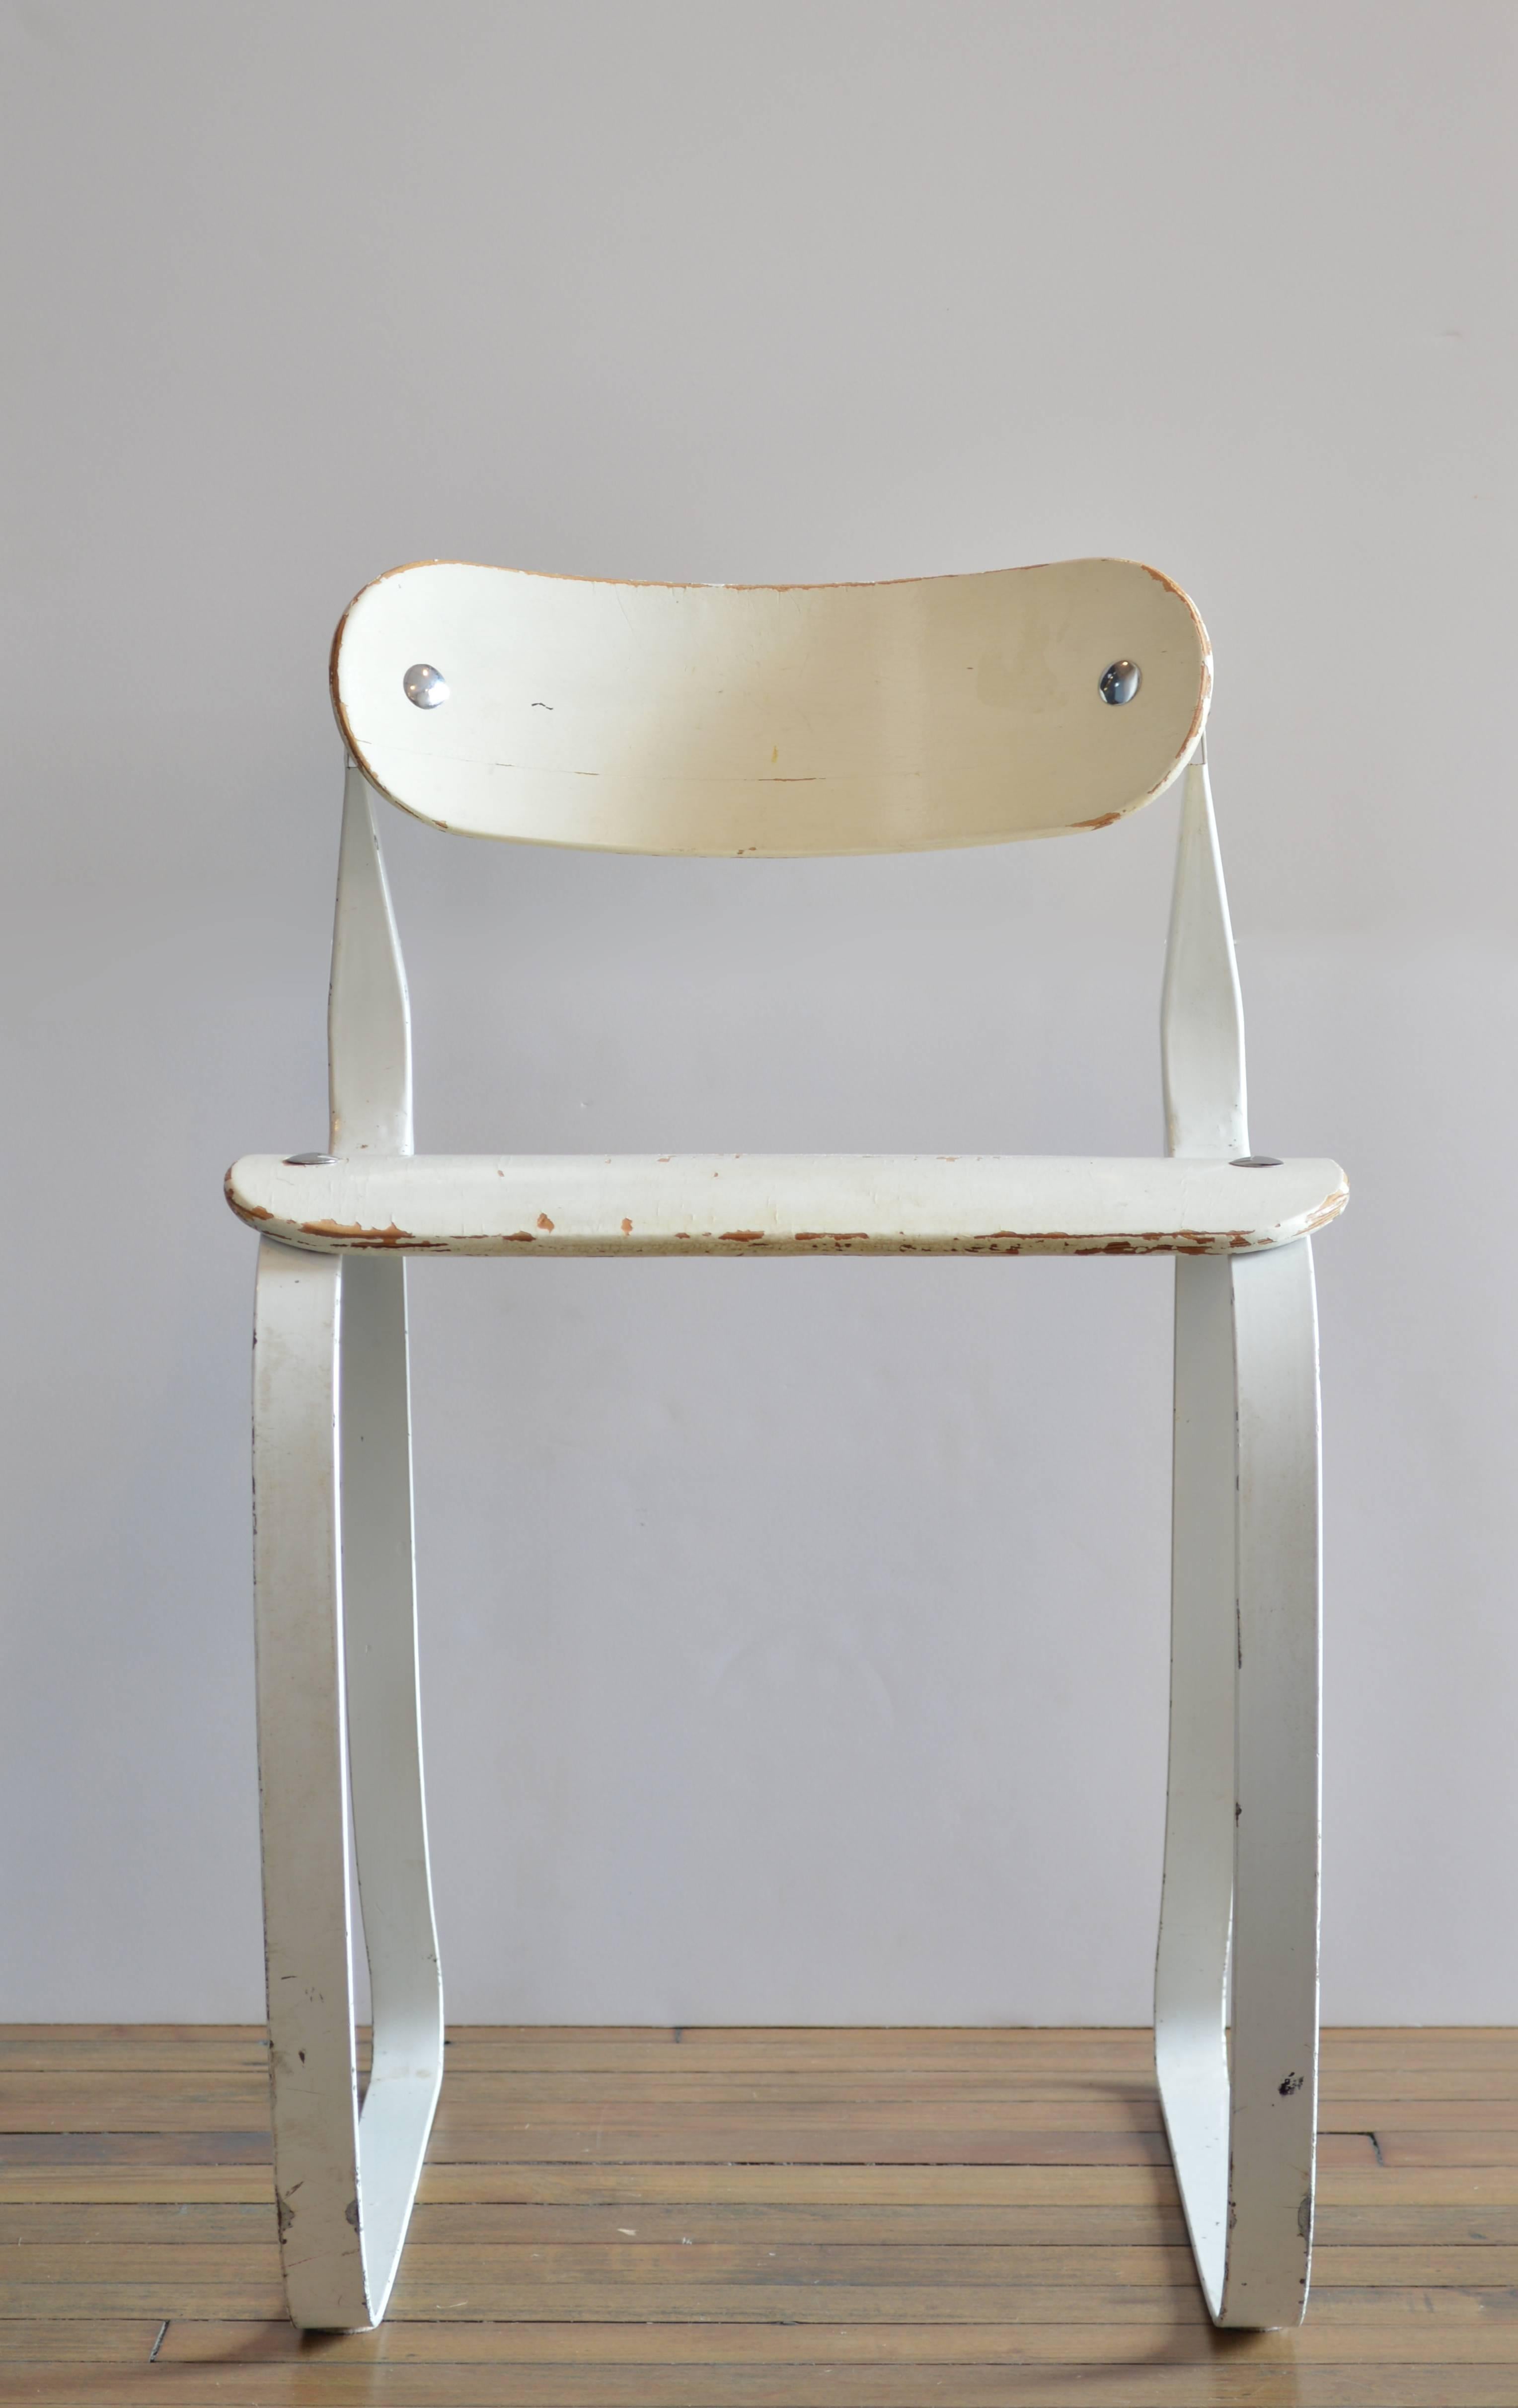 Originally designed by Herman Sperlich for the Ironrite Corporation, this chair is an example of early ergonomic design and was originally designed to be used by factory workers. Now it is considered a collector's item, and is included in the